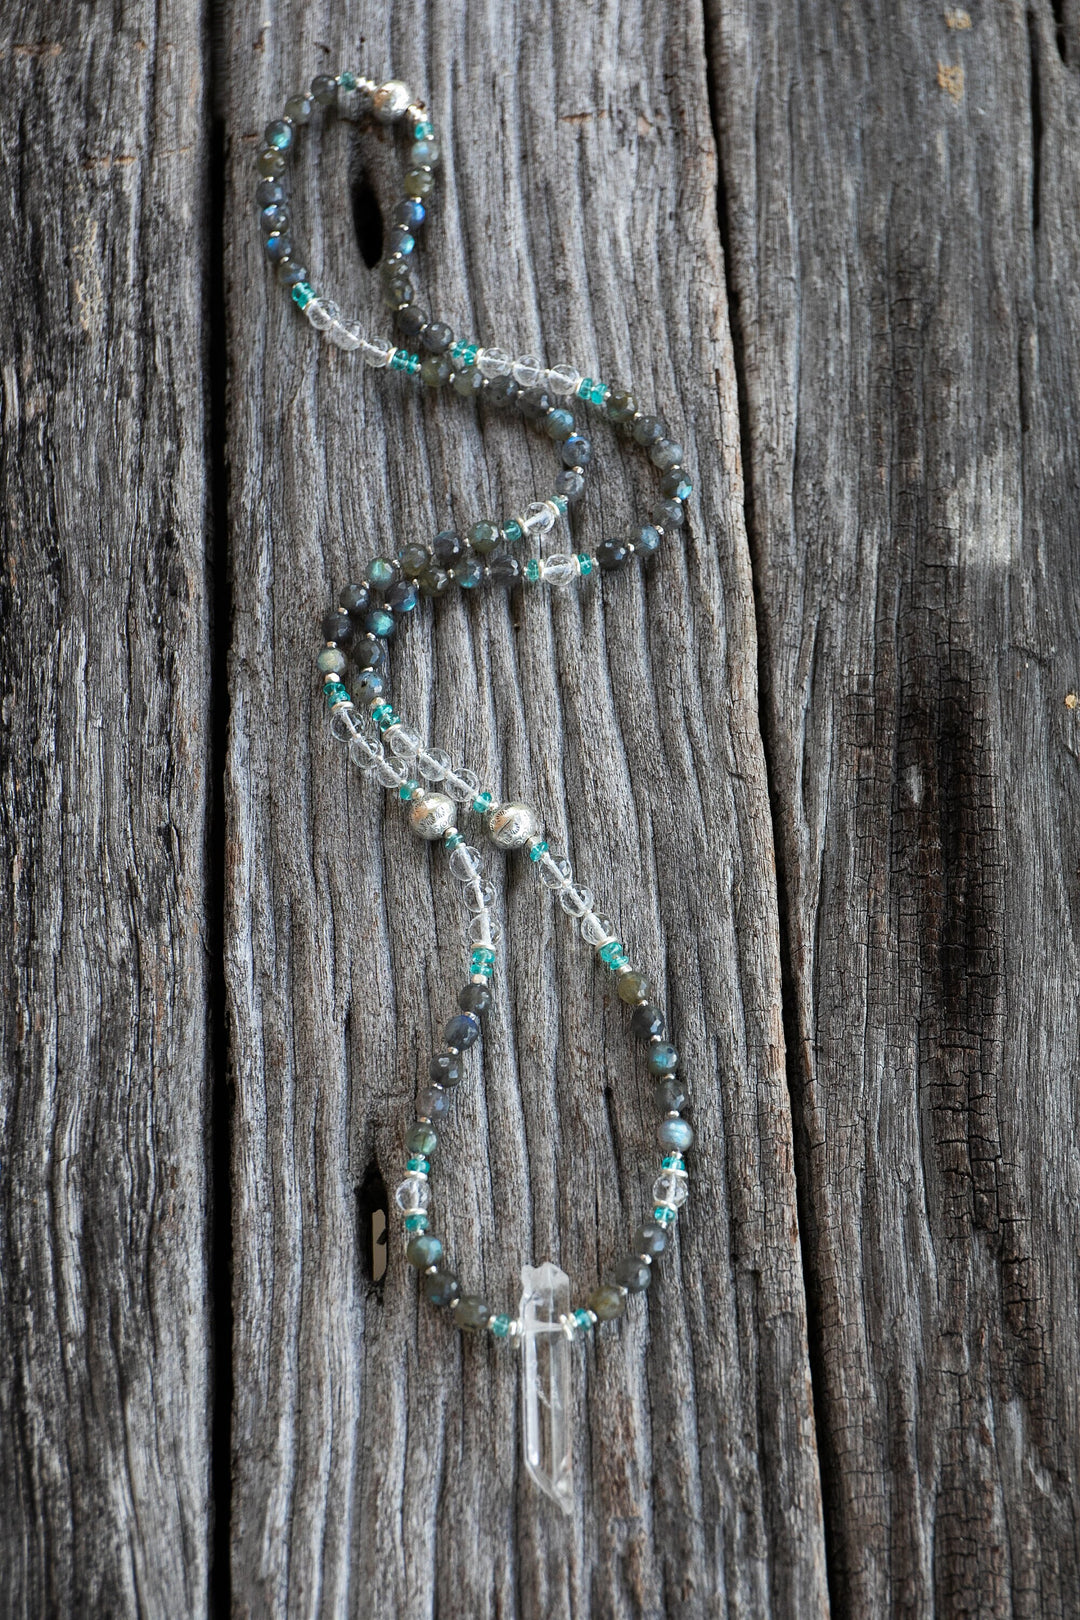 Handmade Labradorite, Crystal and Apatite Mala Necklace with Crystal Quartz Point Pendant + Thai Hill Tribe Silver